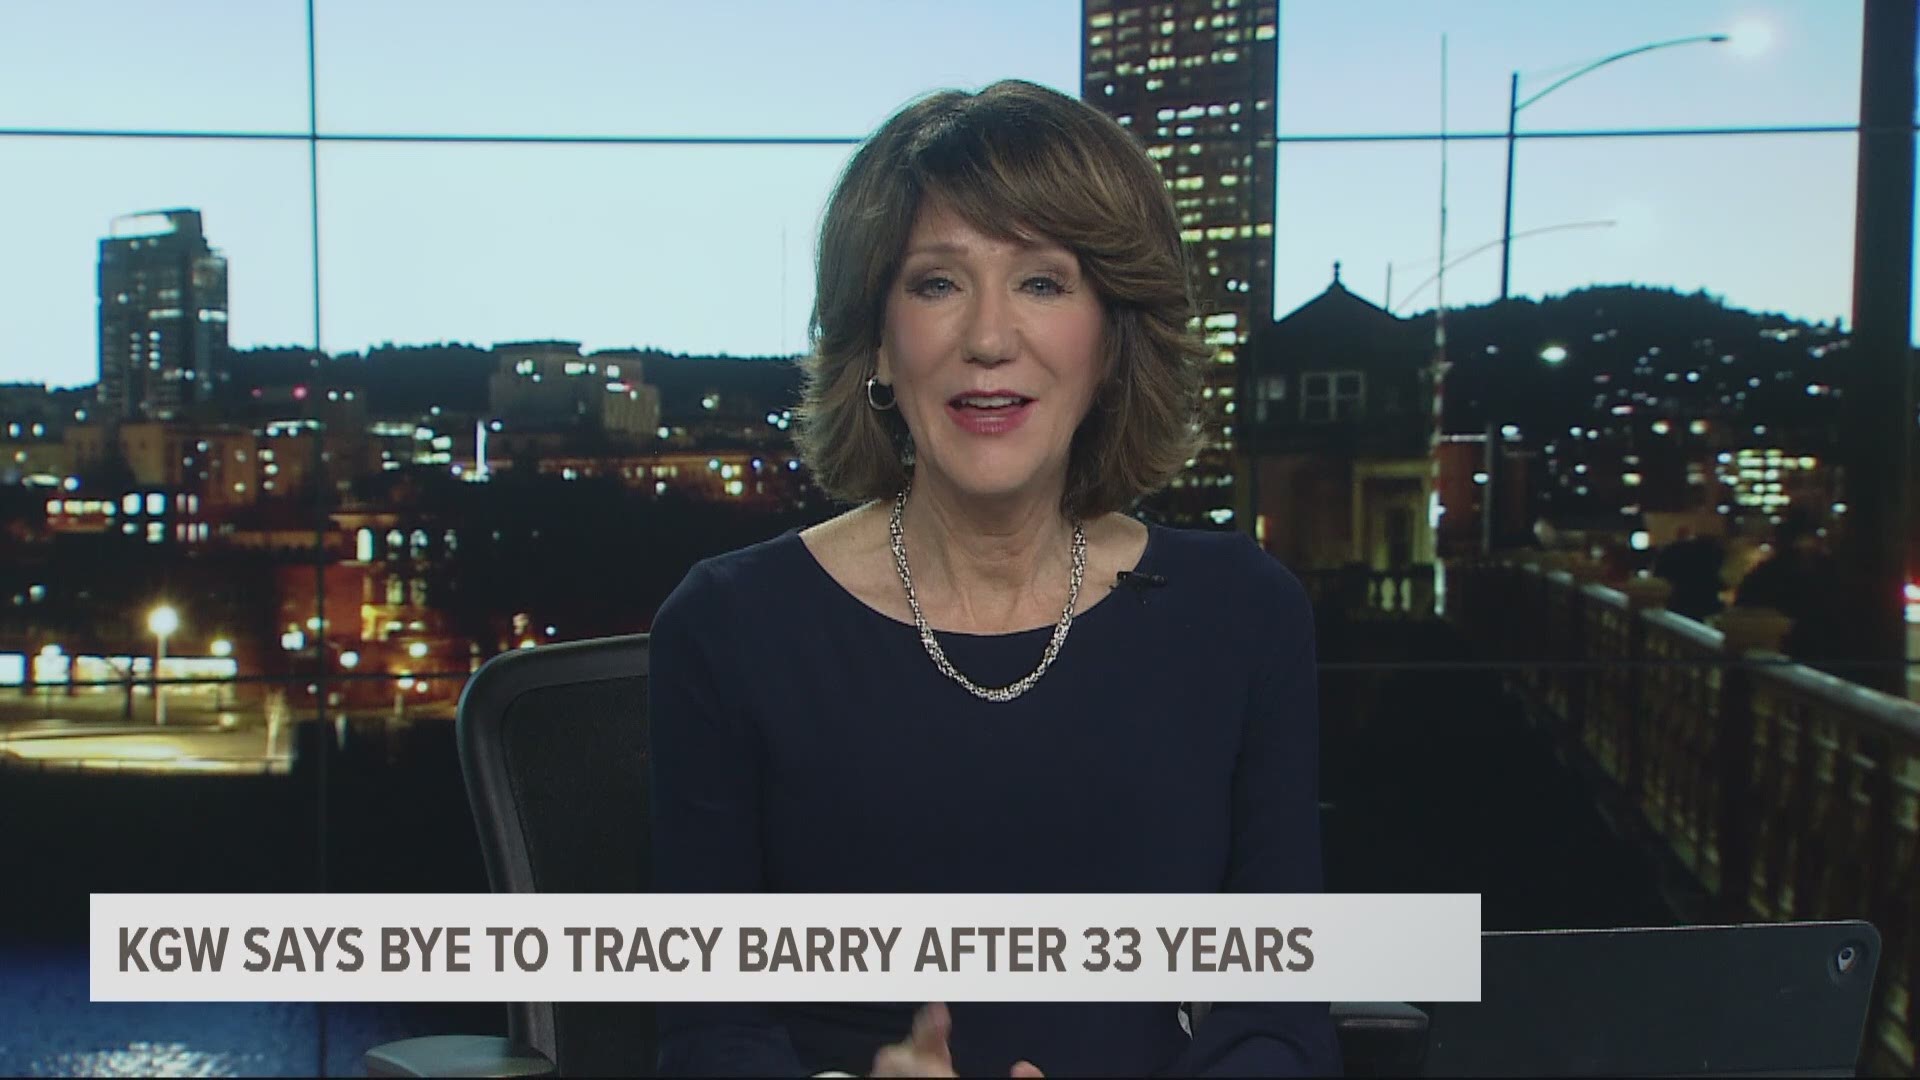 Tracy Barry says goodbye on October 12, 2018 after 33 years at KGW.